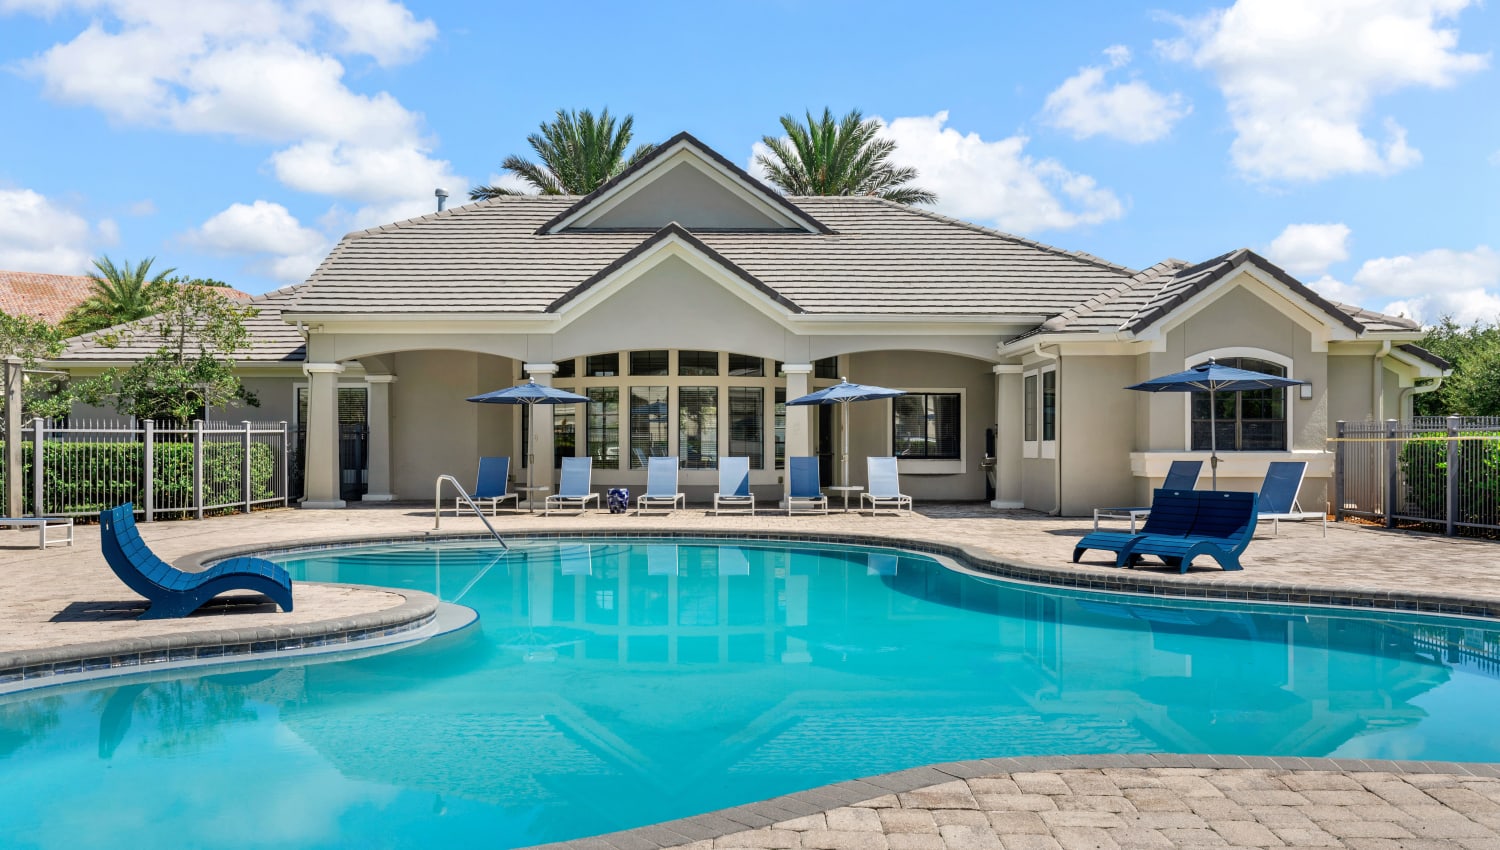 Resort style pool at Mirador & Stovall at River City in Jacksonville, Florida